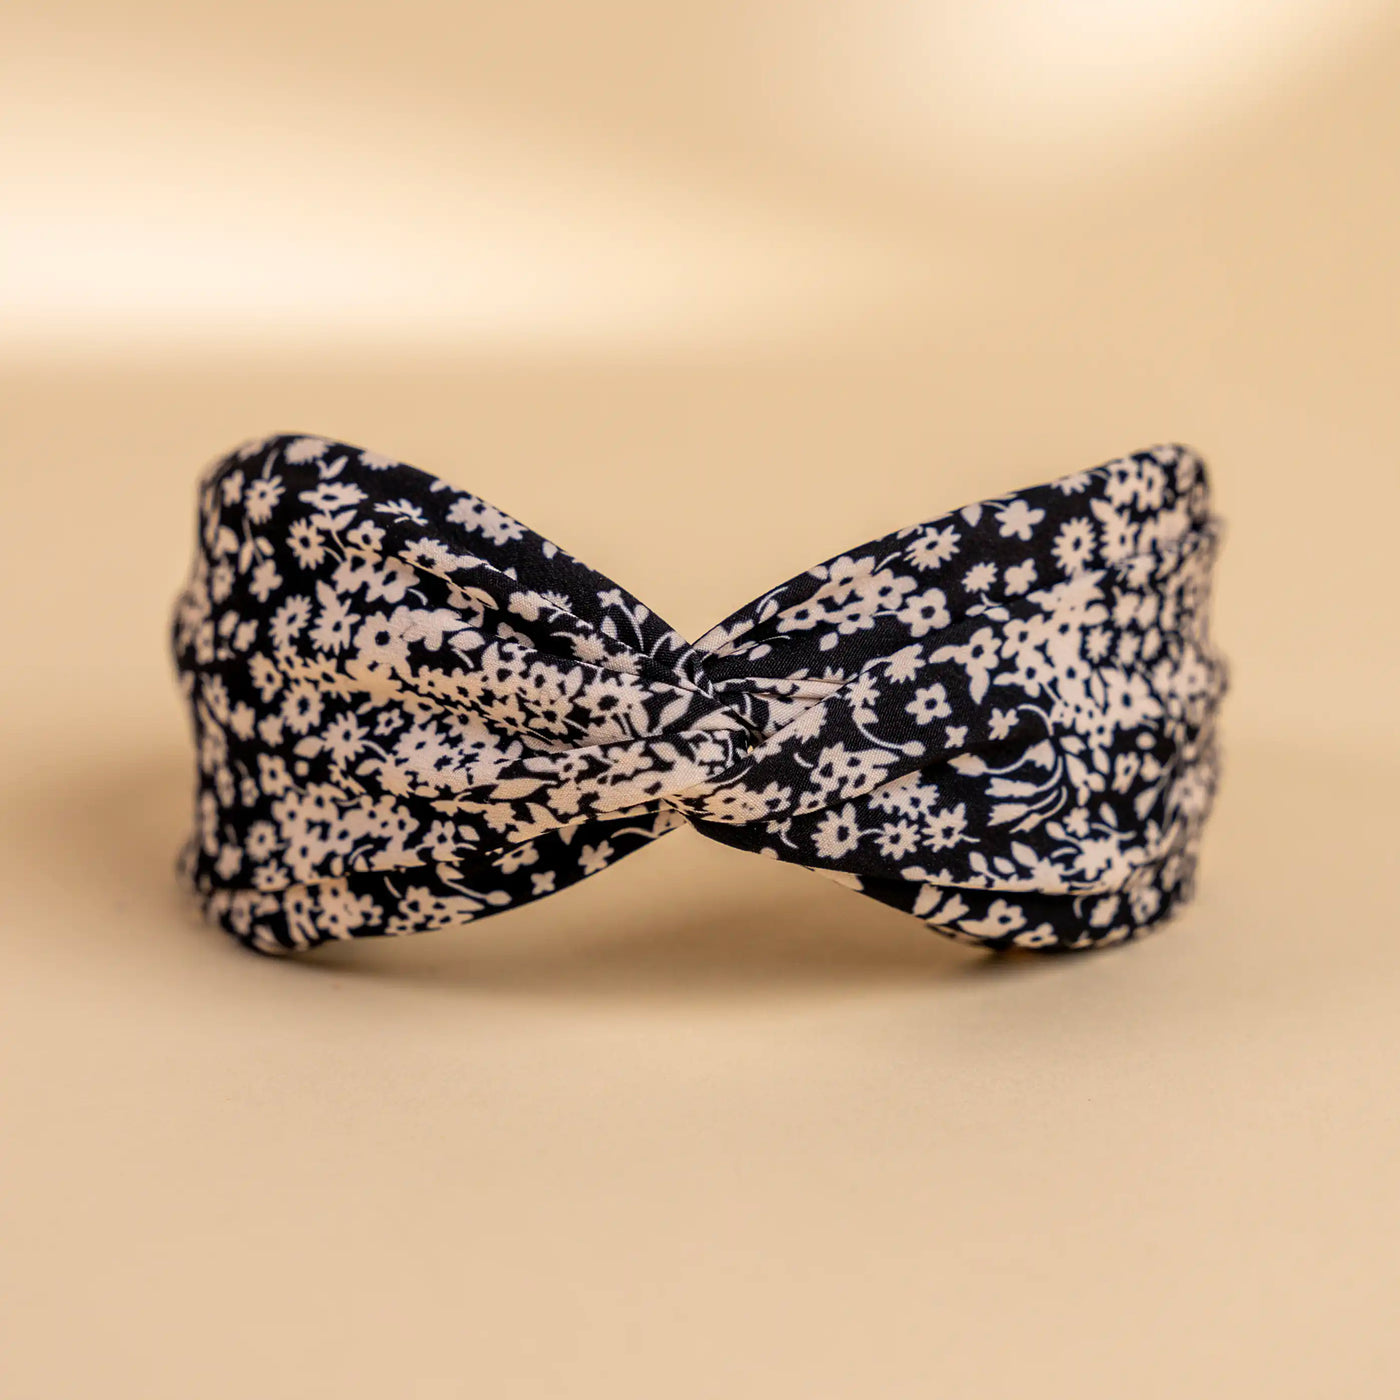 Lucys black and white simple floral headband. Black background with simple white floral pattern. Front view.